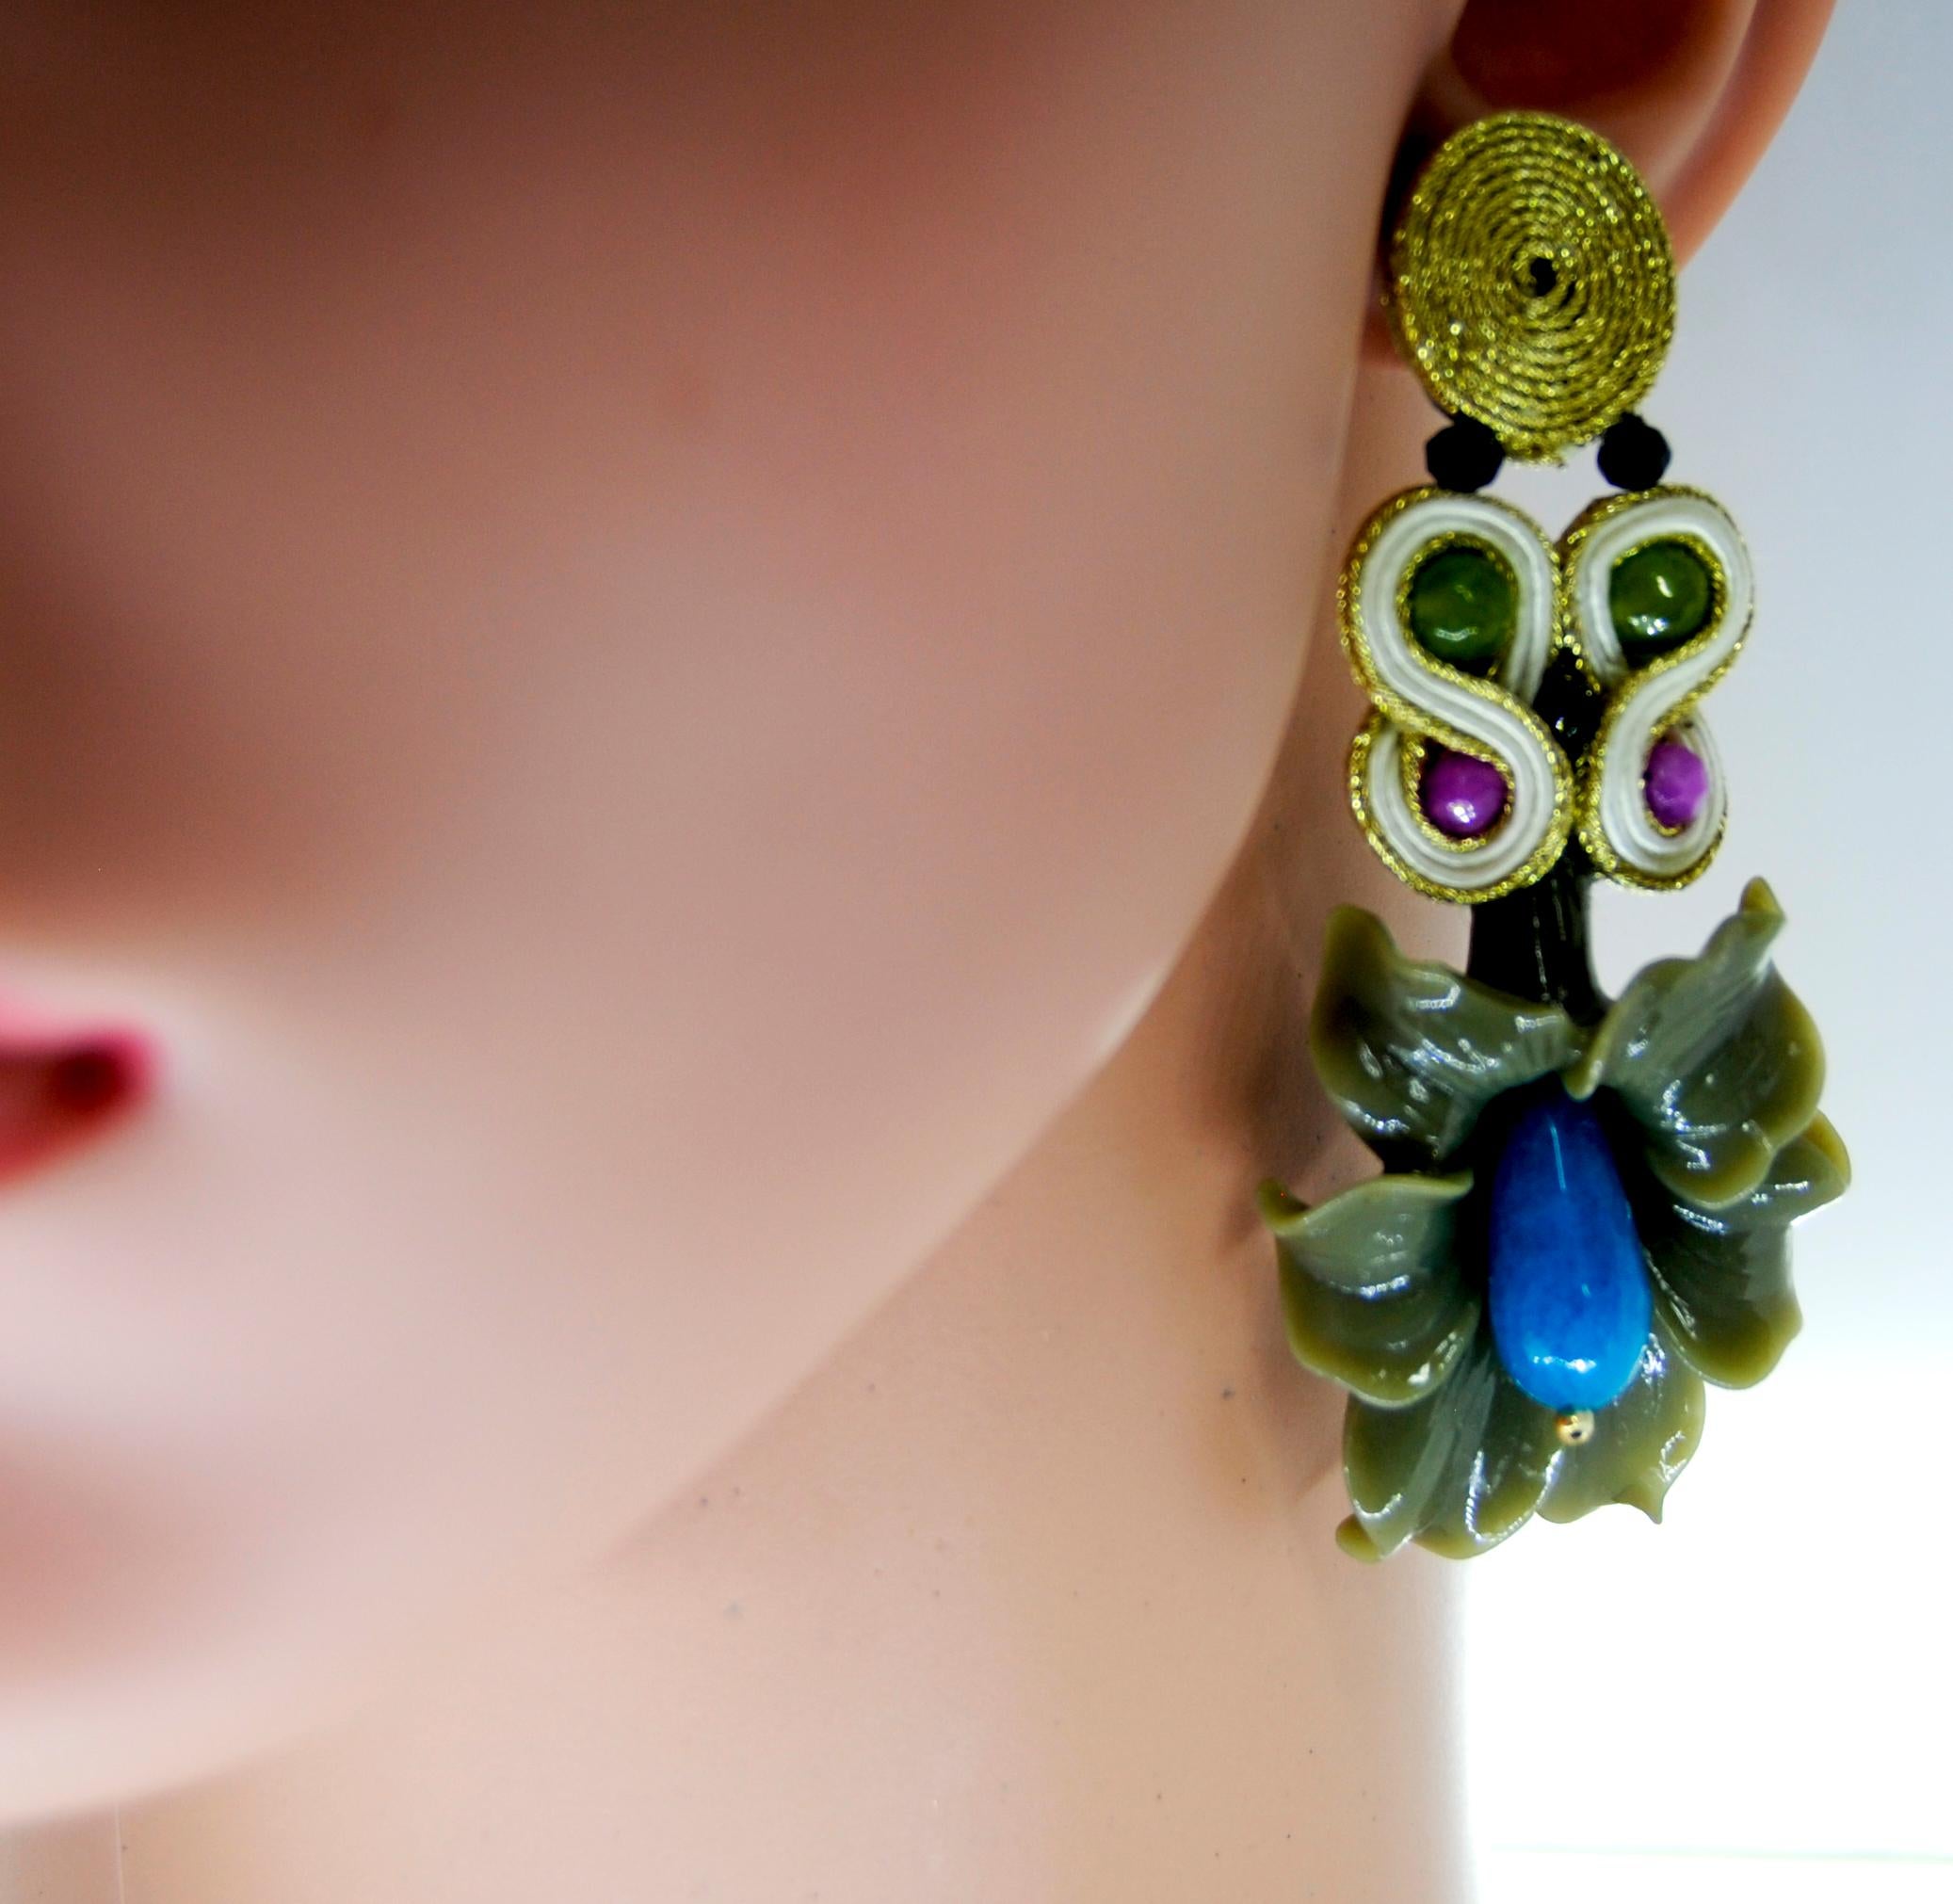 Women's Pradera Kalas Collection Soutache and Silver Earrings with Blue Jade and Resins